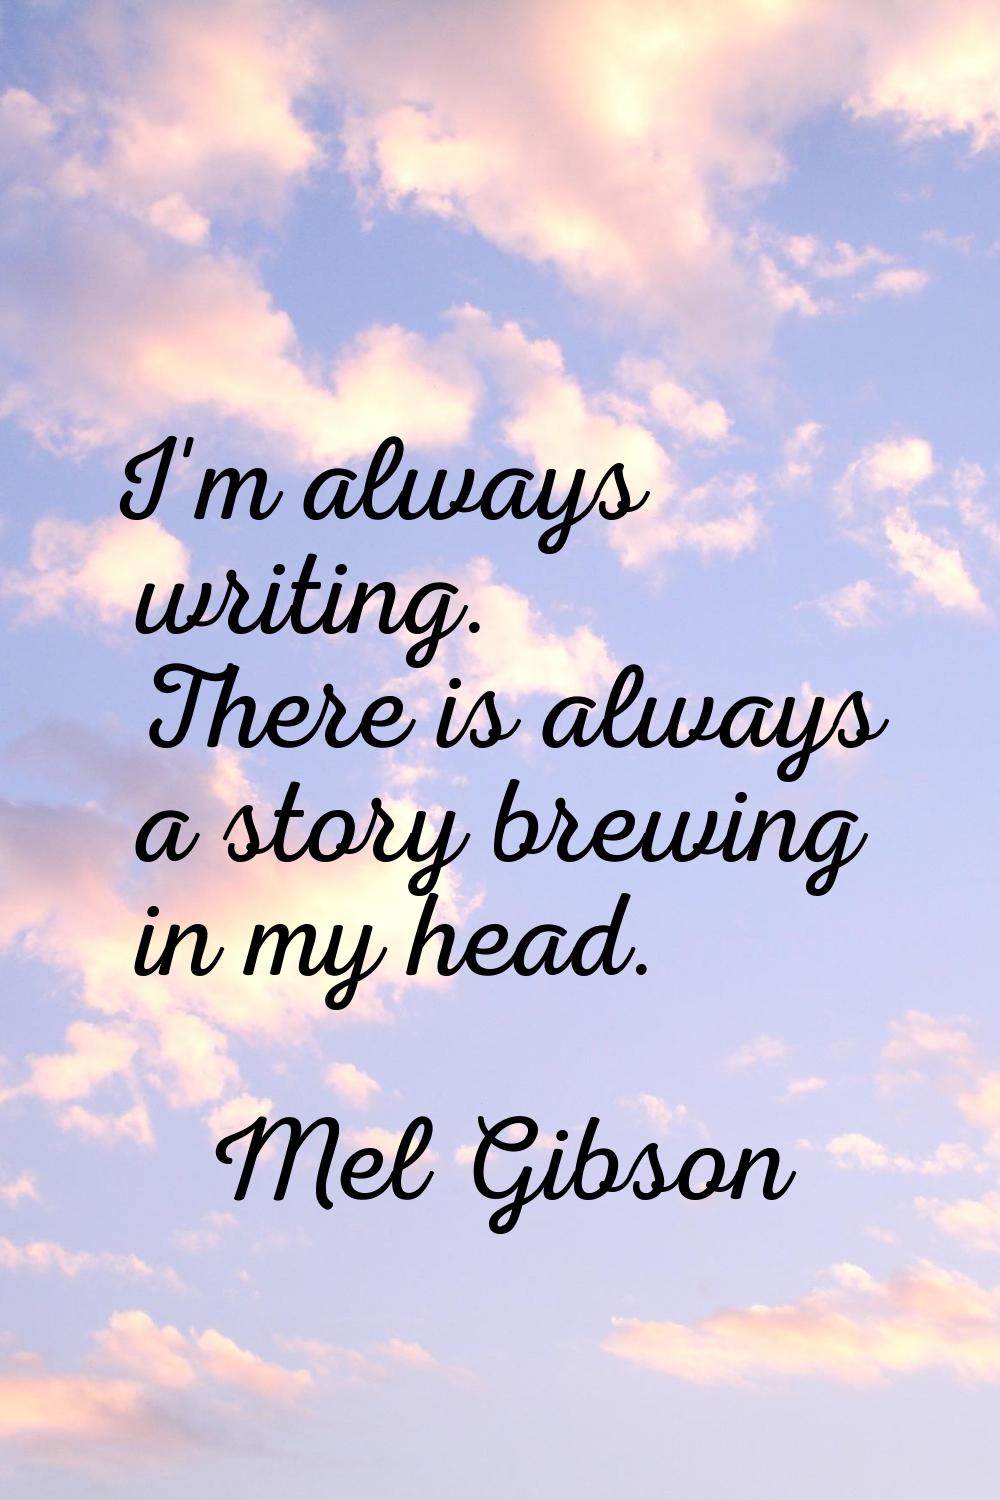 I'm always writing. There is always a story brewing in my head.